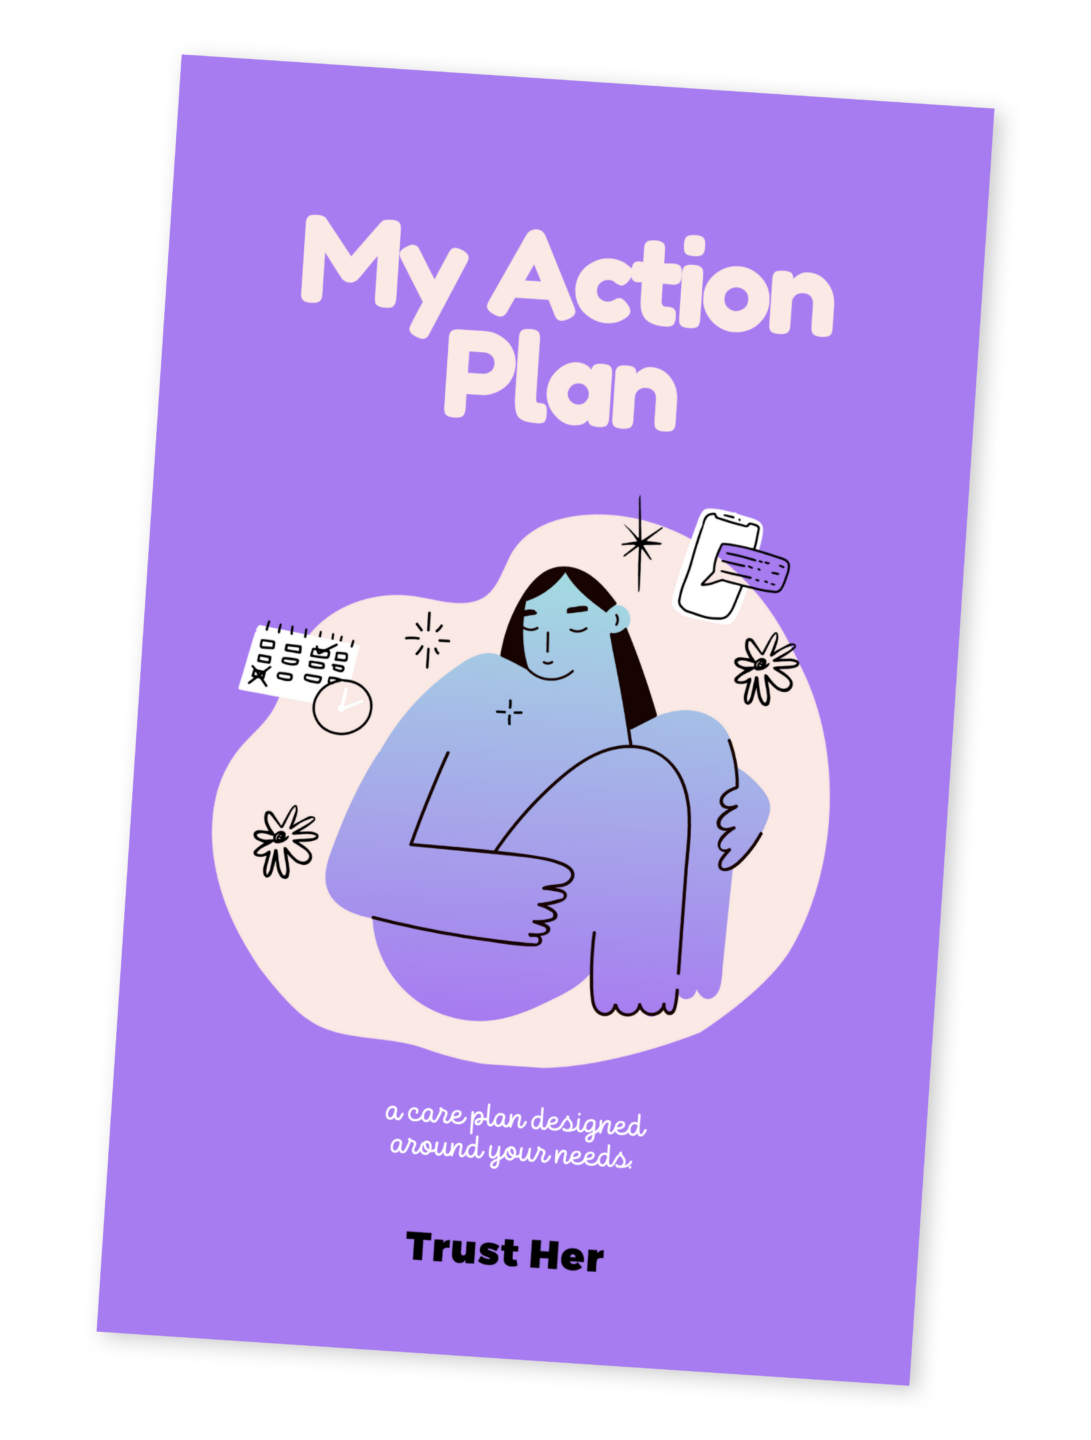 Front cover of "My Action Plan" which features an illustration of a young woman with contraceptives around her.